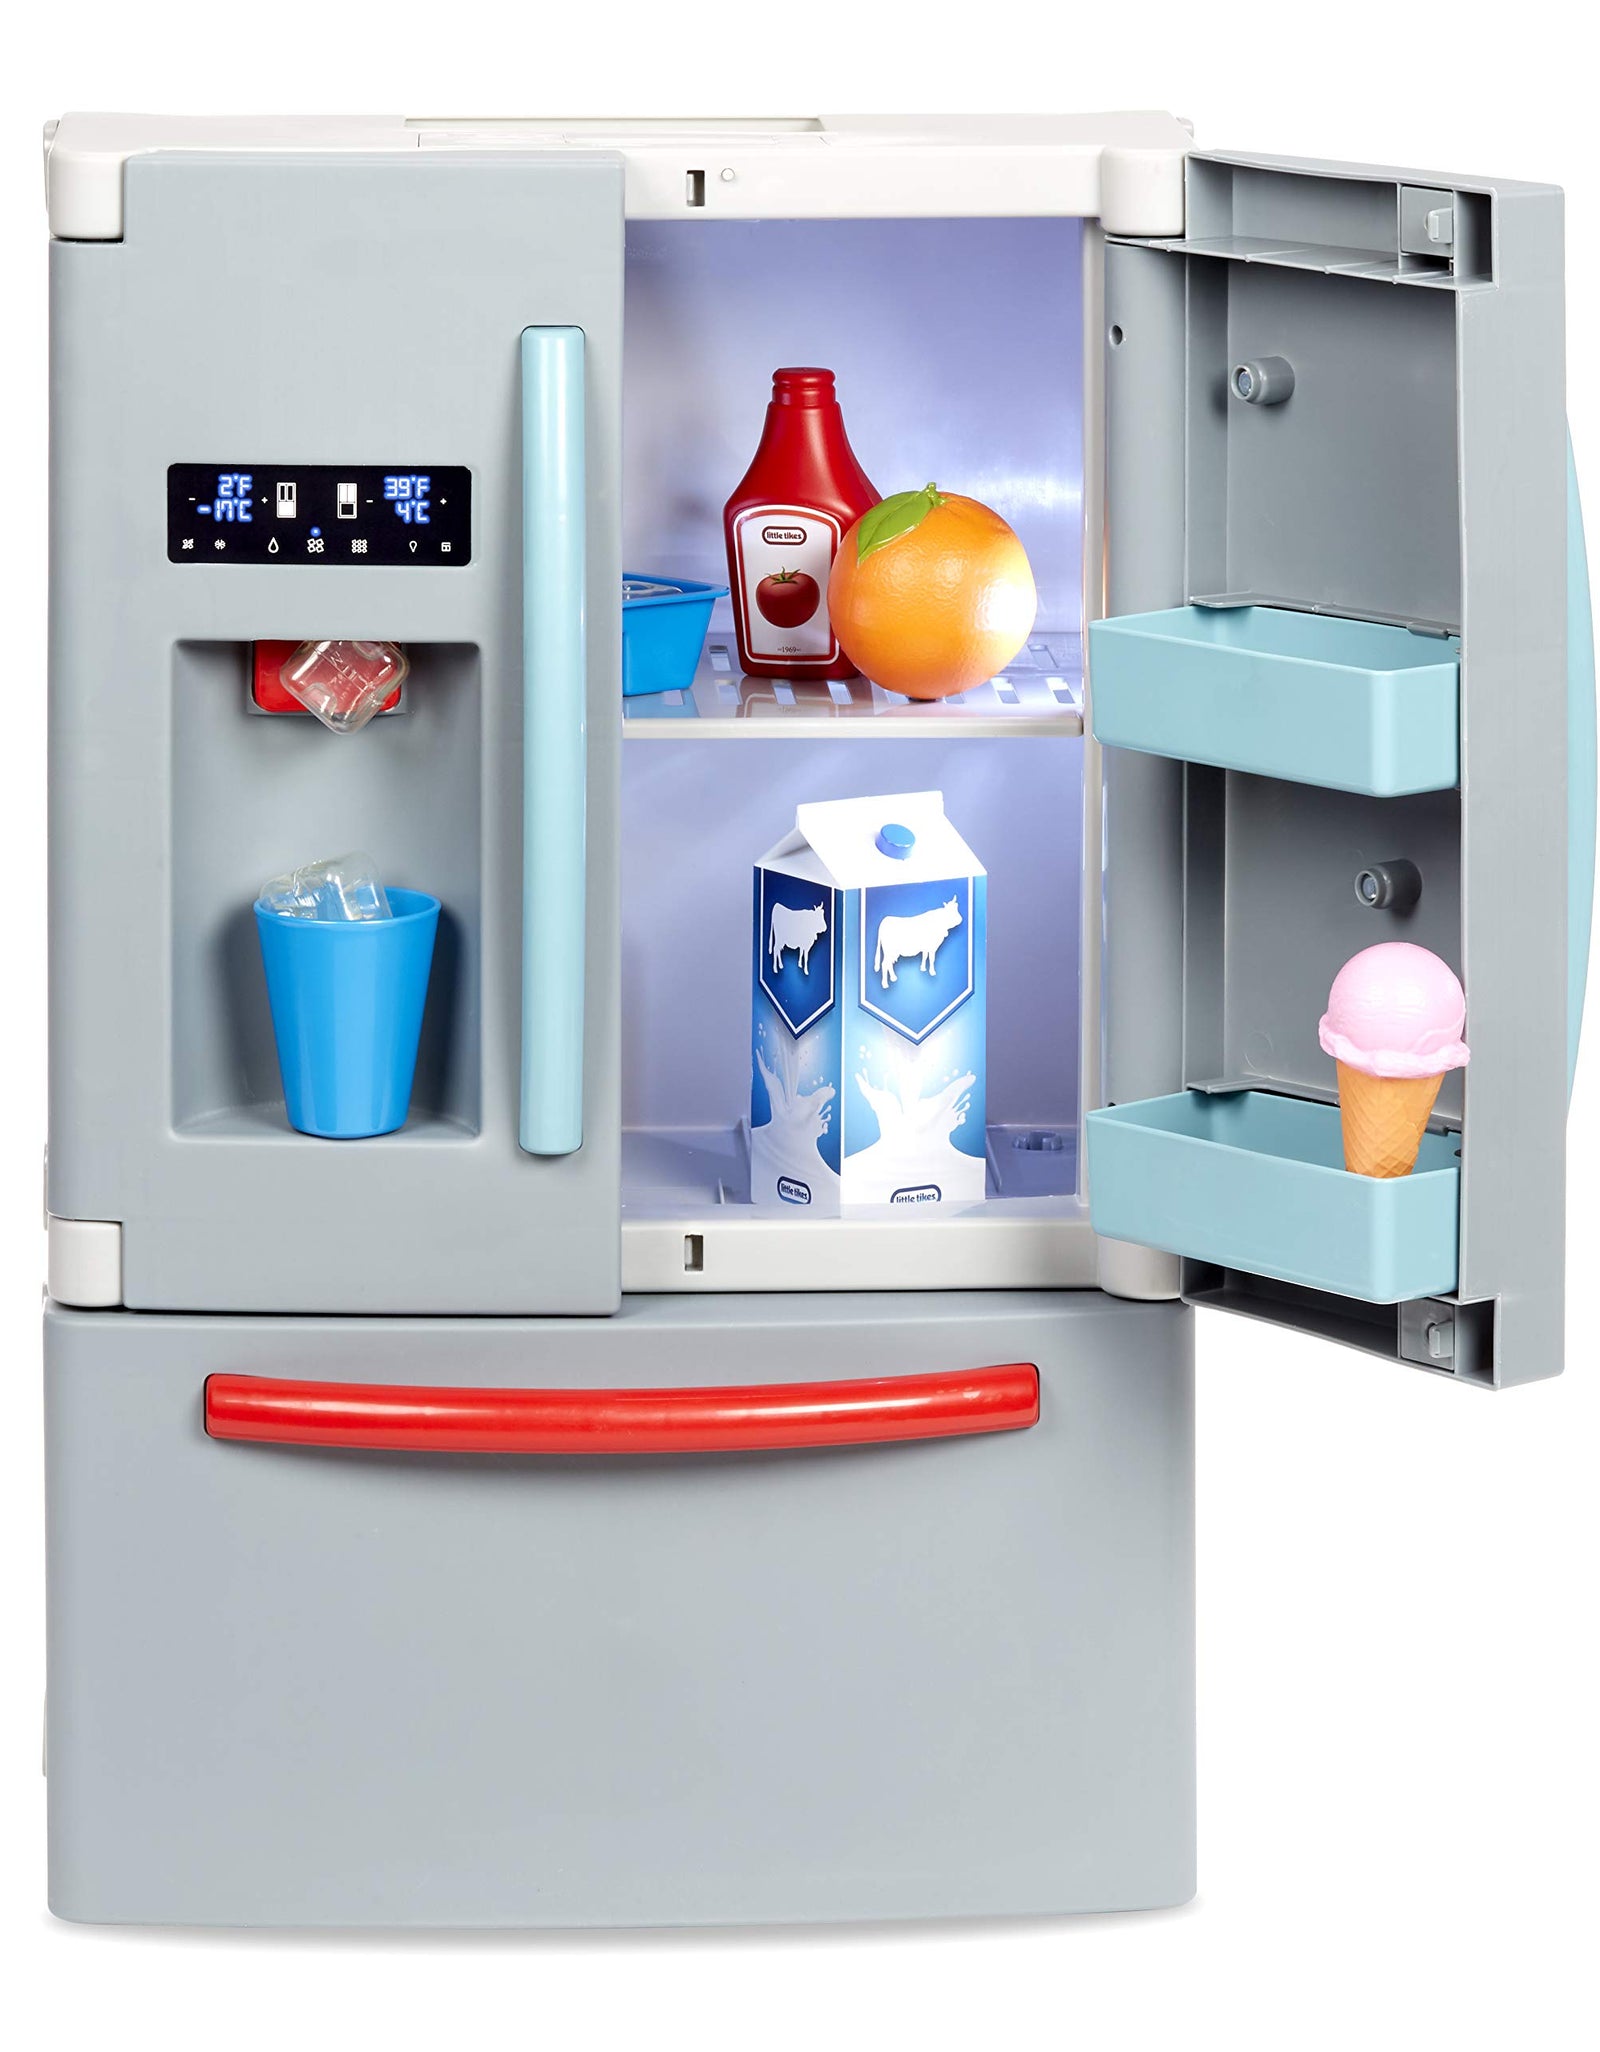 Little Tikes First Fridge Refrigerator with Ice Dispenser Pretend Play Appliance for Kids, Play Kitchen Set with Kitchen Playset Accessories Unique Toy Multi-Color